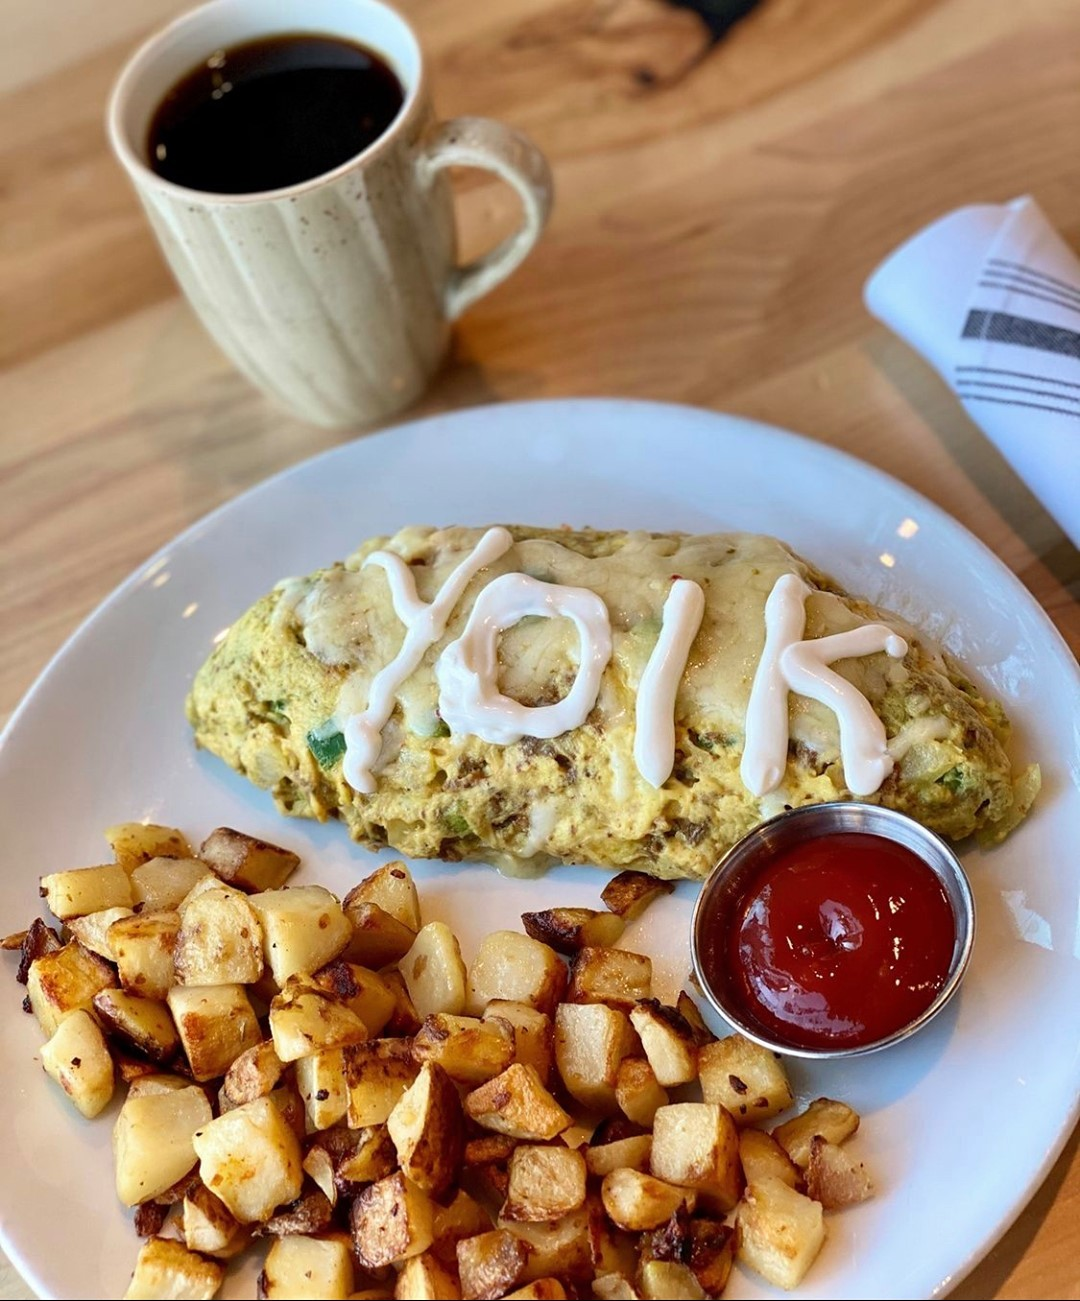 Omelette and potatoes from Yolk